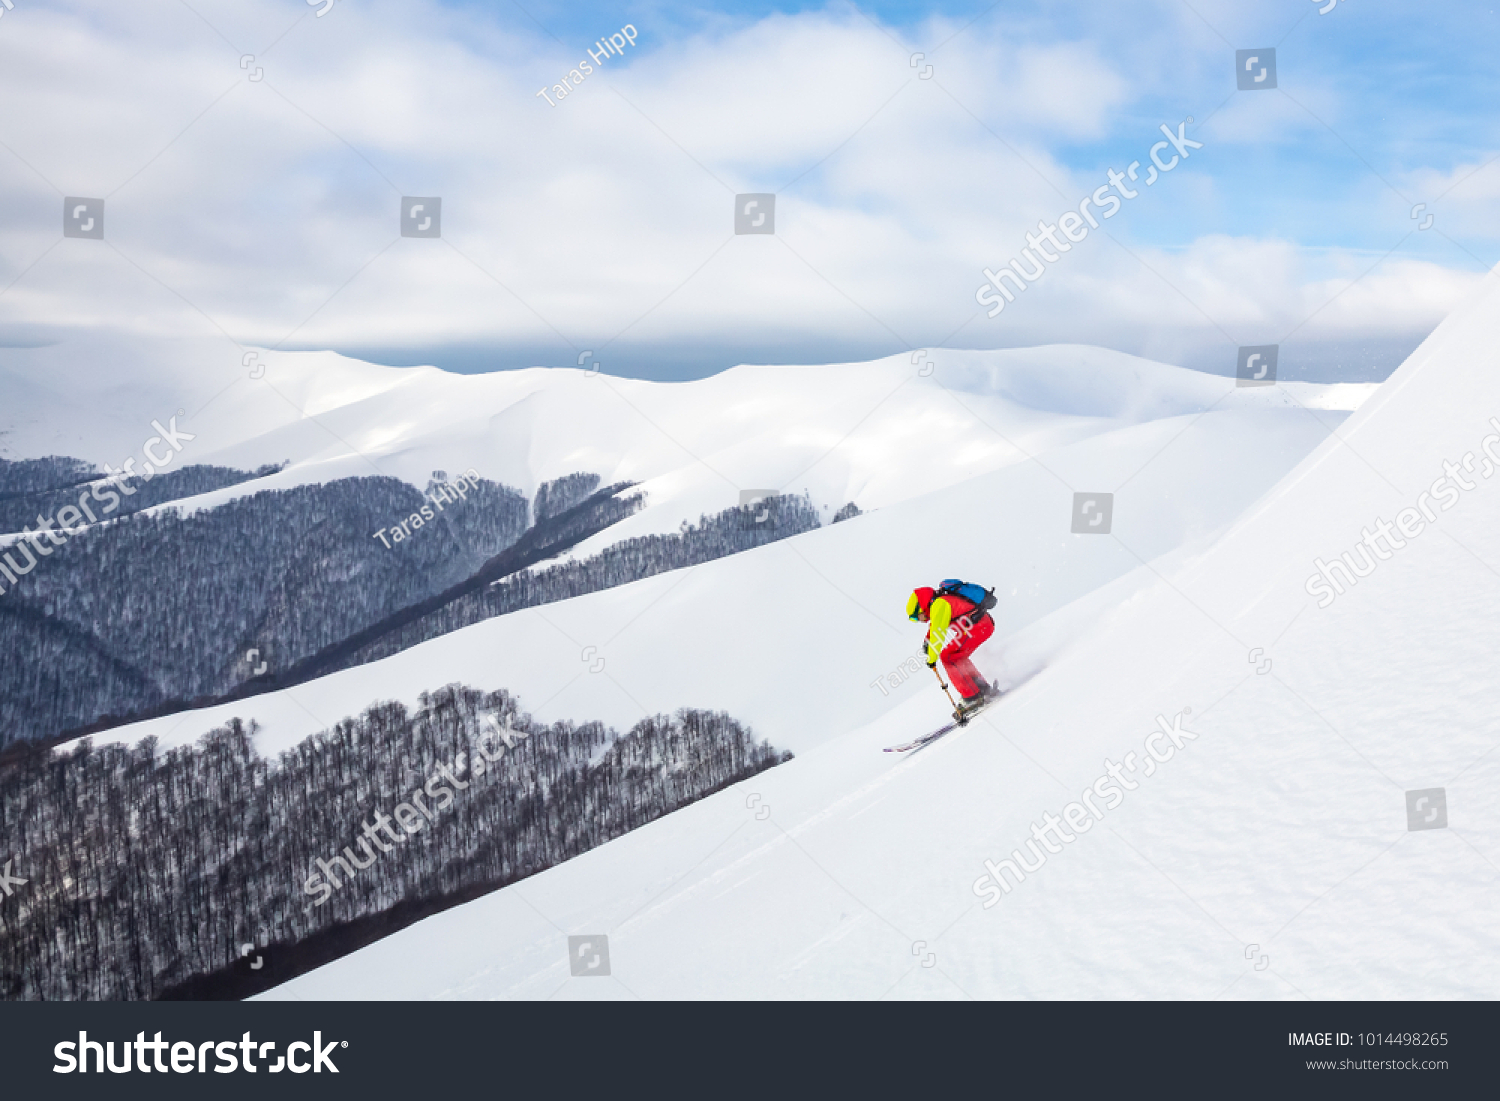 A man is skiing on the slope, wearing brigh  red yellow jumpsuit. Good skiing day, blue sky on the background. #1014498265